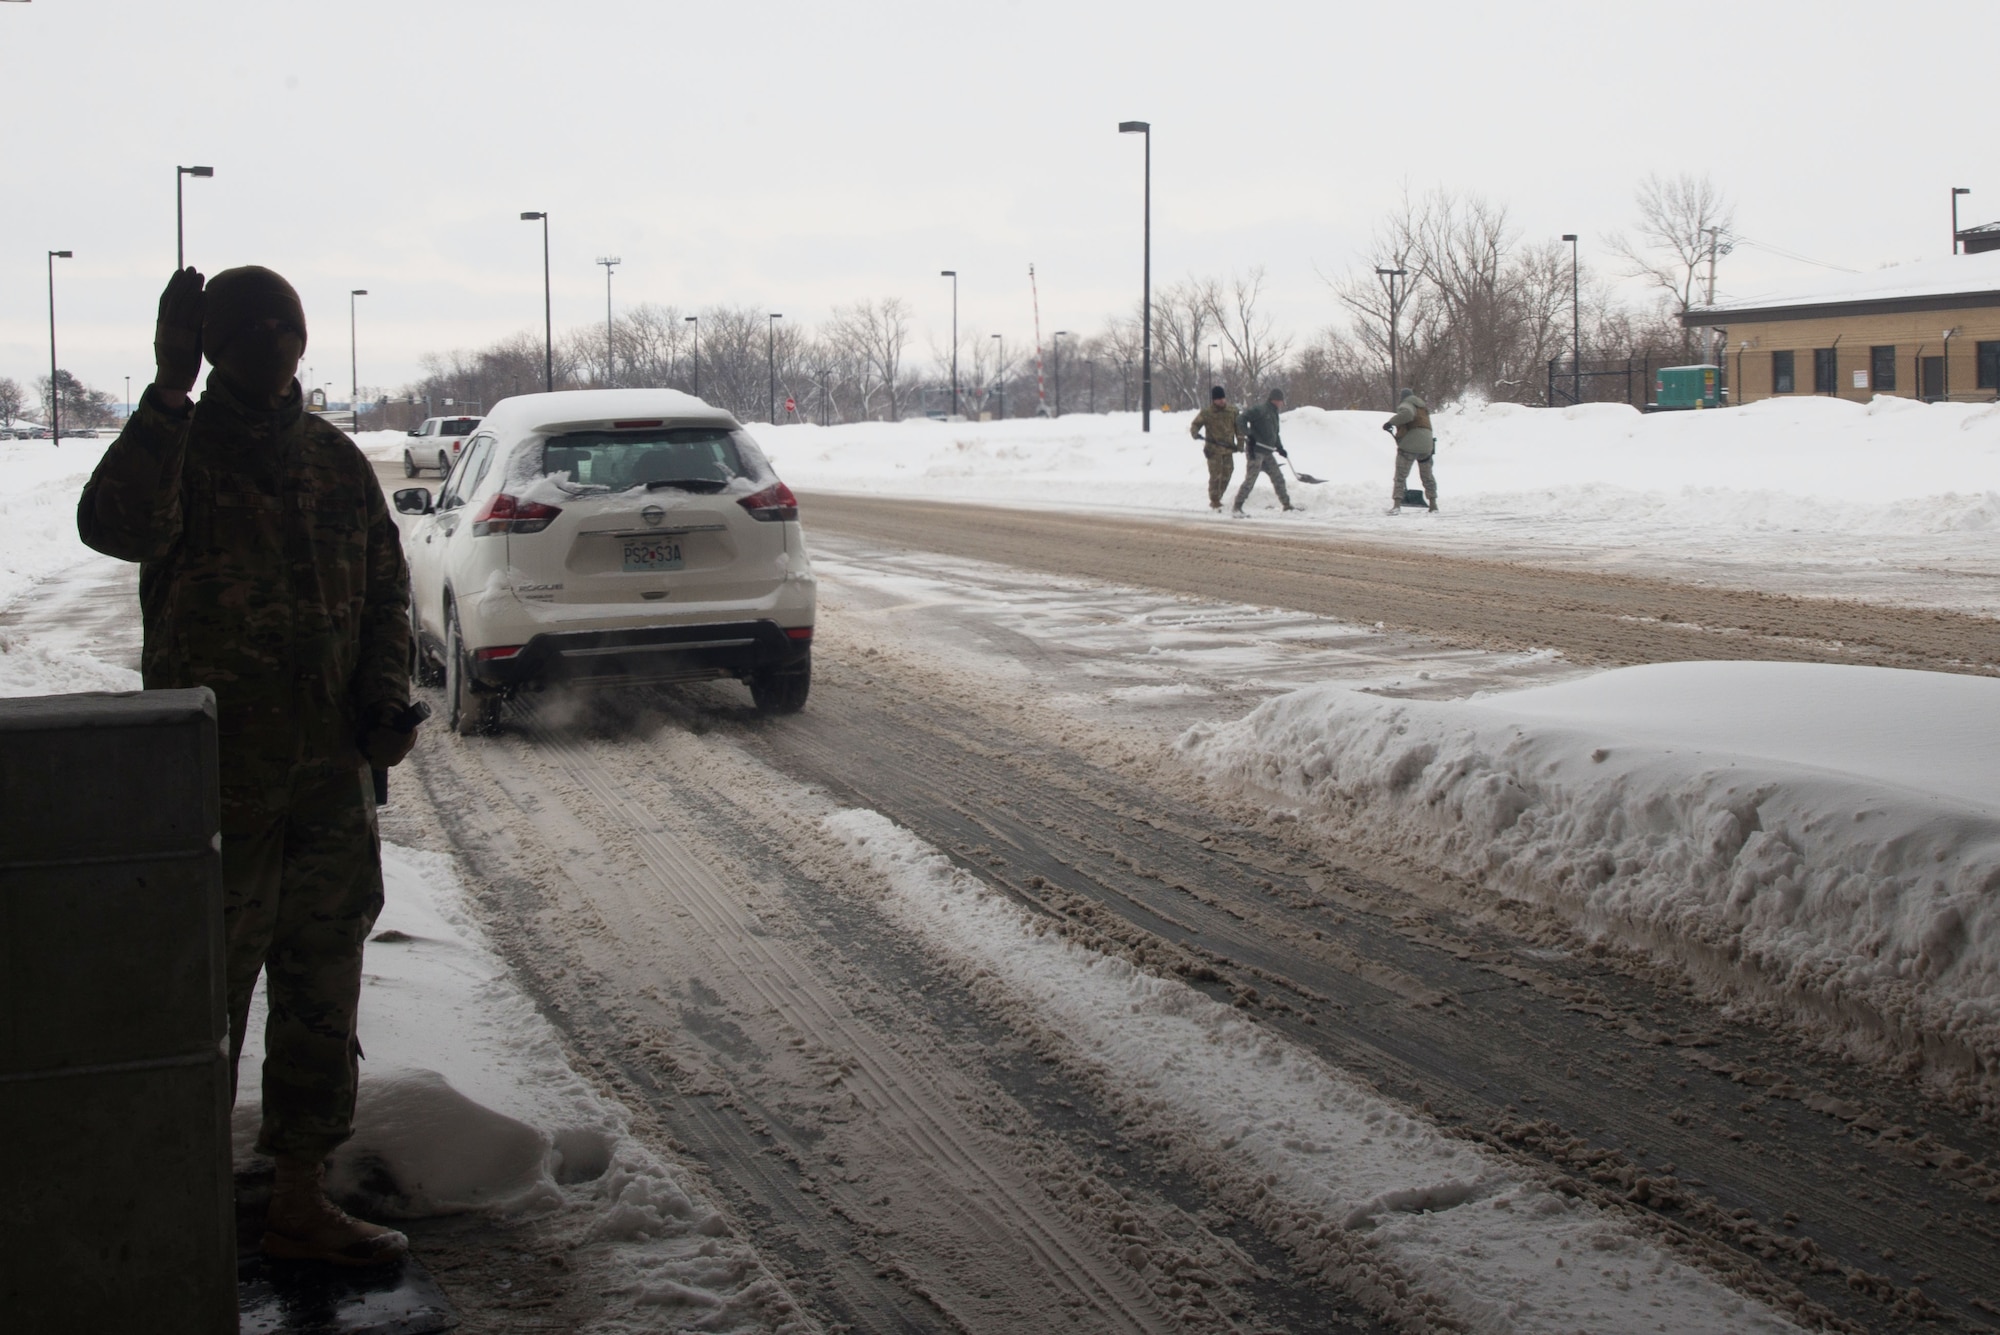 Members of the 55th Security Forces Squadron shovel snow March 7, 2019, on Offutt Air Force Base. The snow was removed in order to open additional lanes of traffic at the U.S. Strategic Command gate. (U.S. Air Force photo by Tech. Sgt. Rachelle Blake)